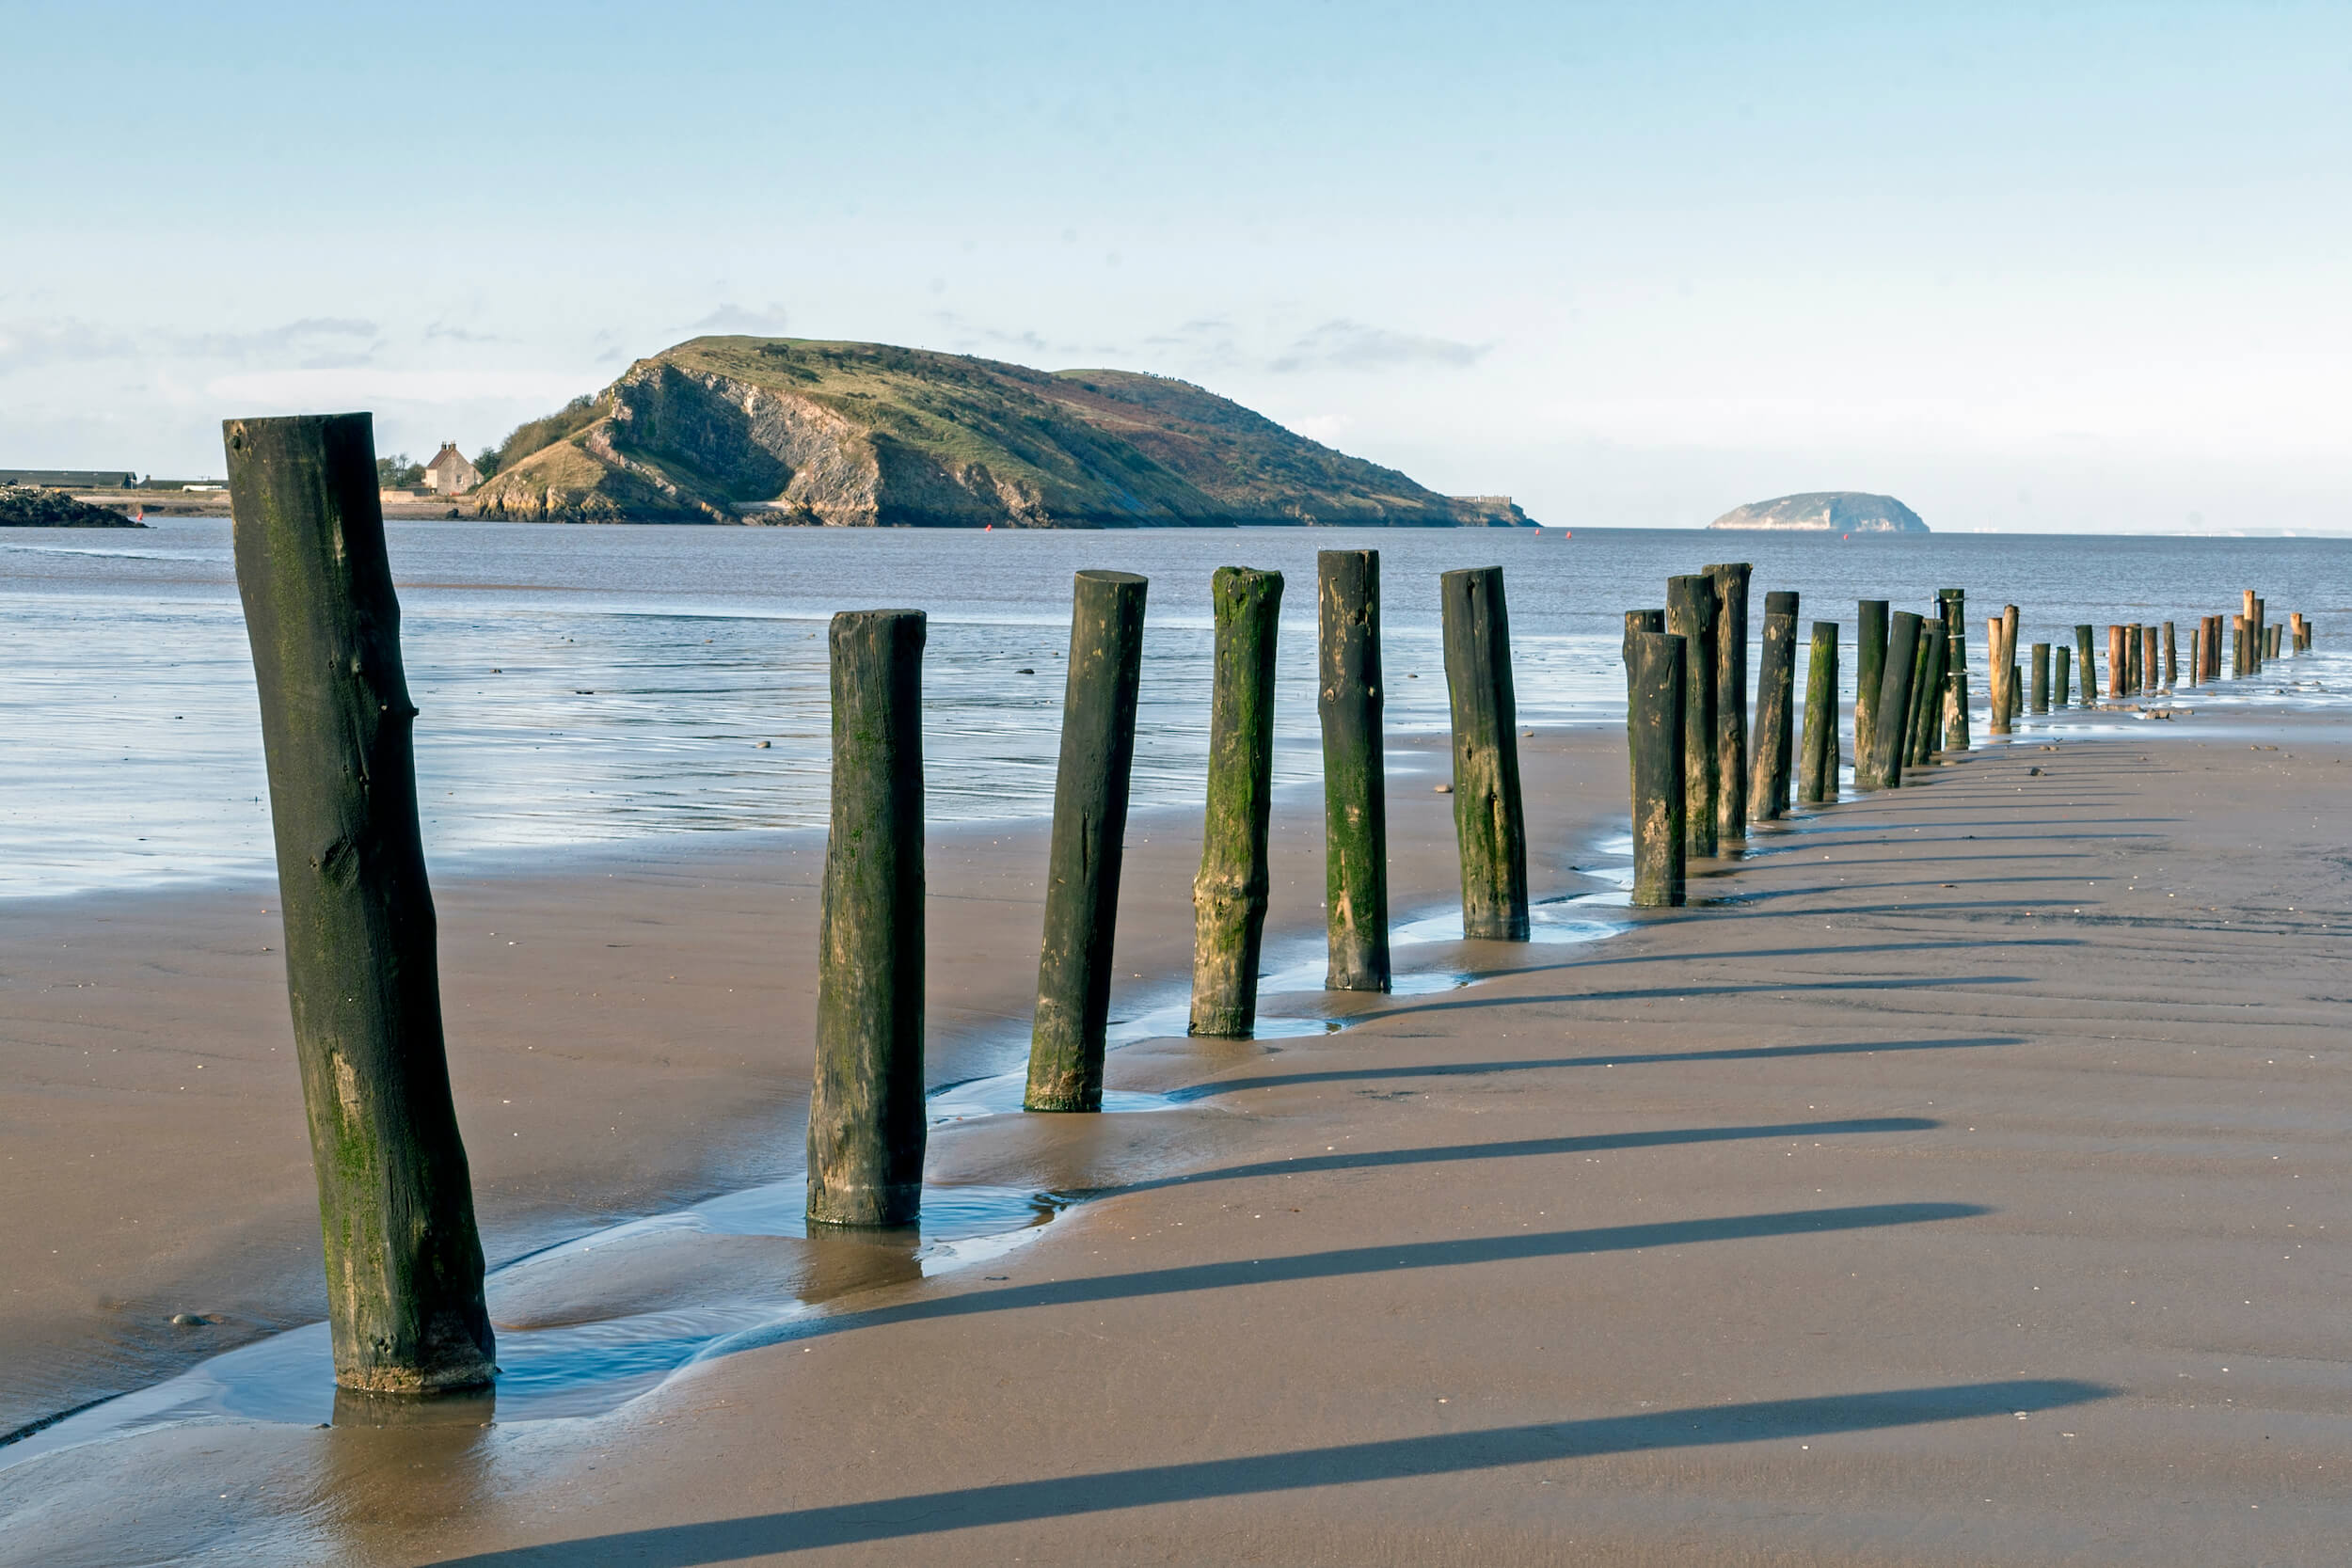 Row of groynes on the beach at Weston-super-Mare